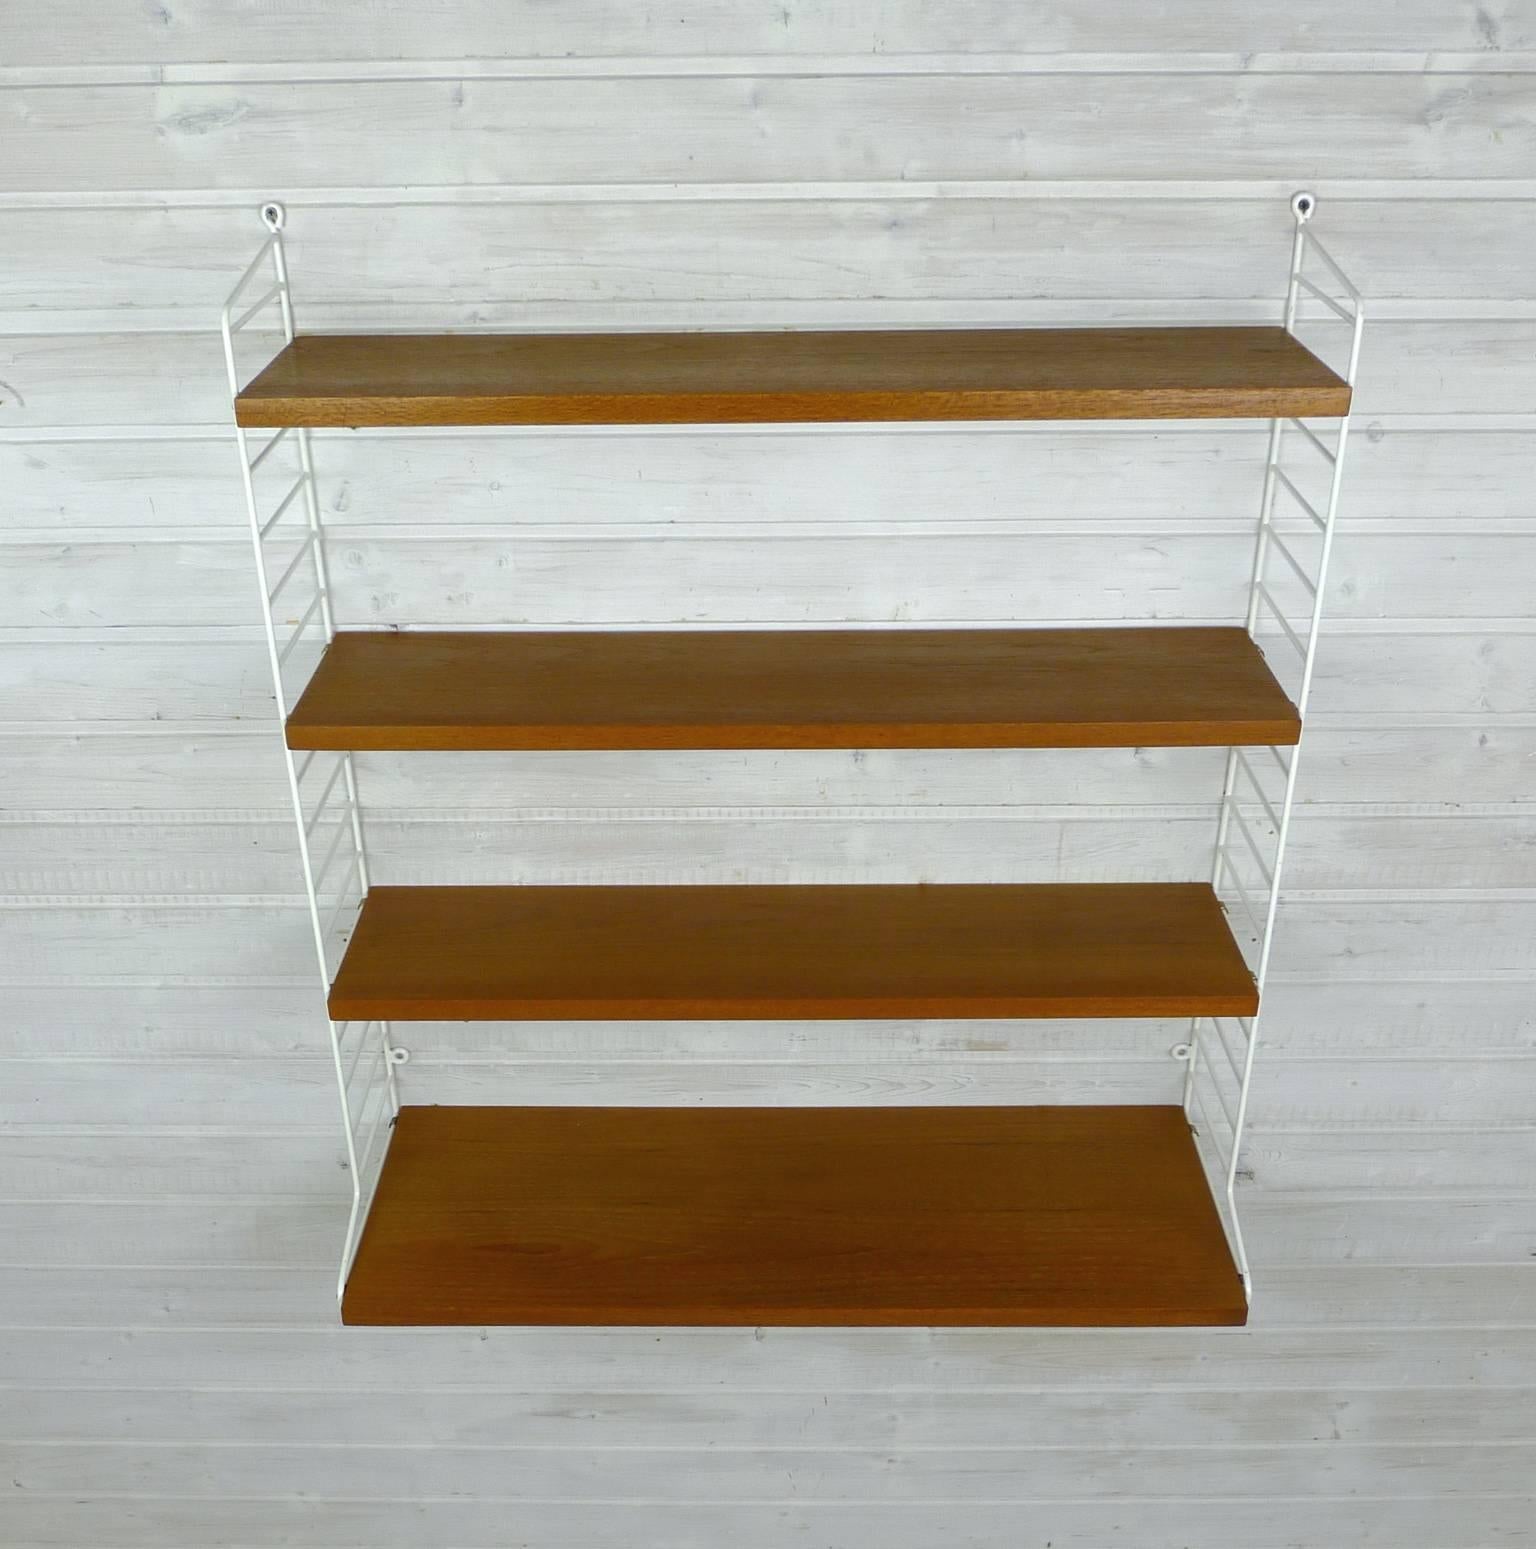 Nisse Strinning designed his famous shelving system in 1949. It was produced by his own operating String Design AB in Sweden. This wall shelf consists of two white coated ladders, three teak shelves with a depth of 20 cm, and a shelf with a depth of